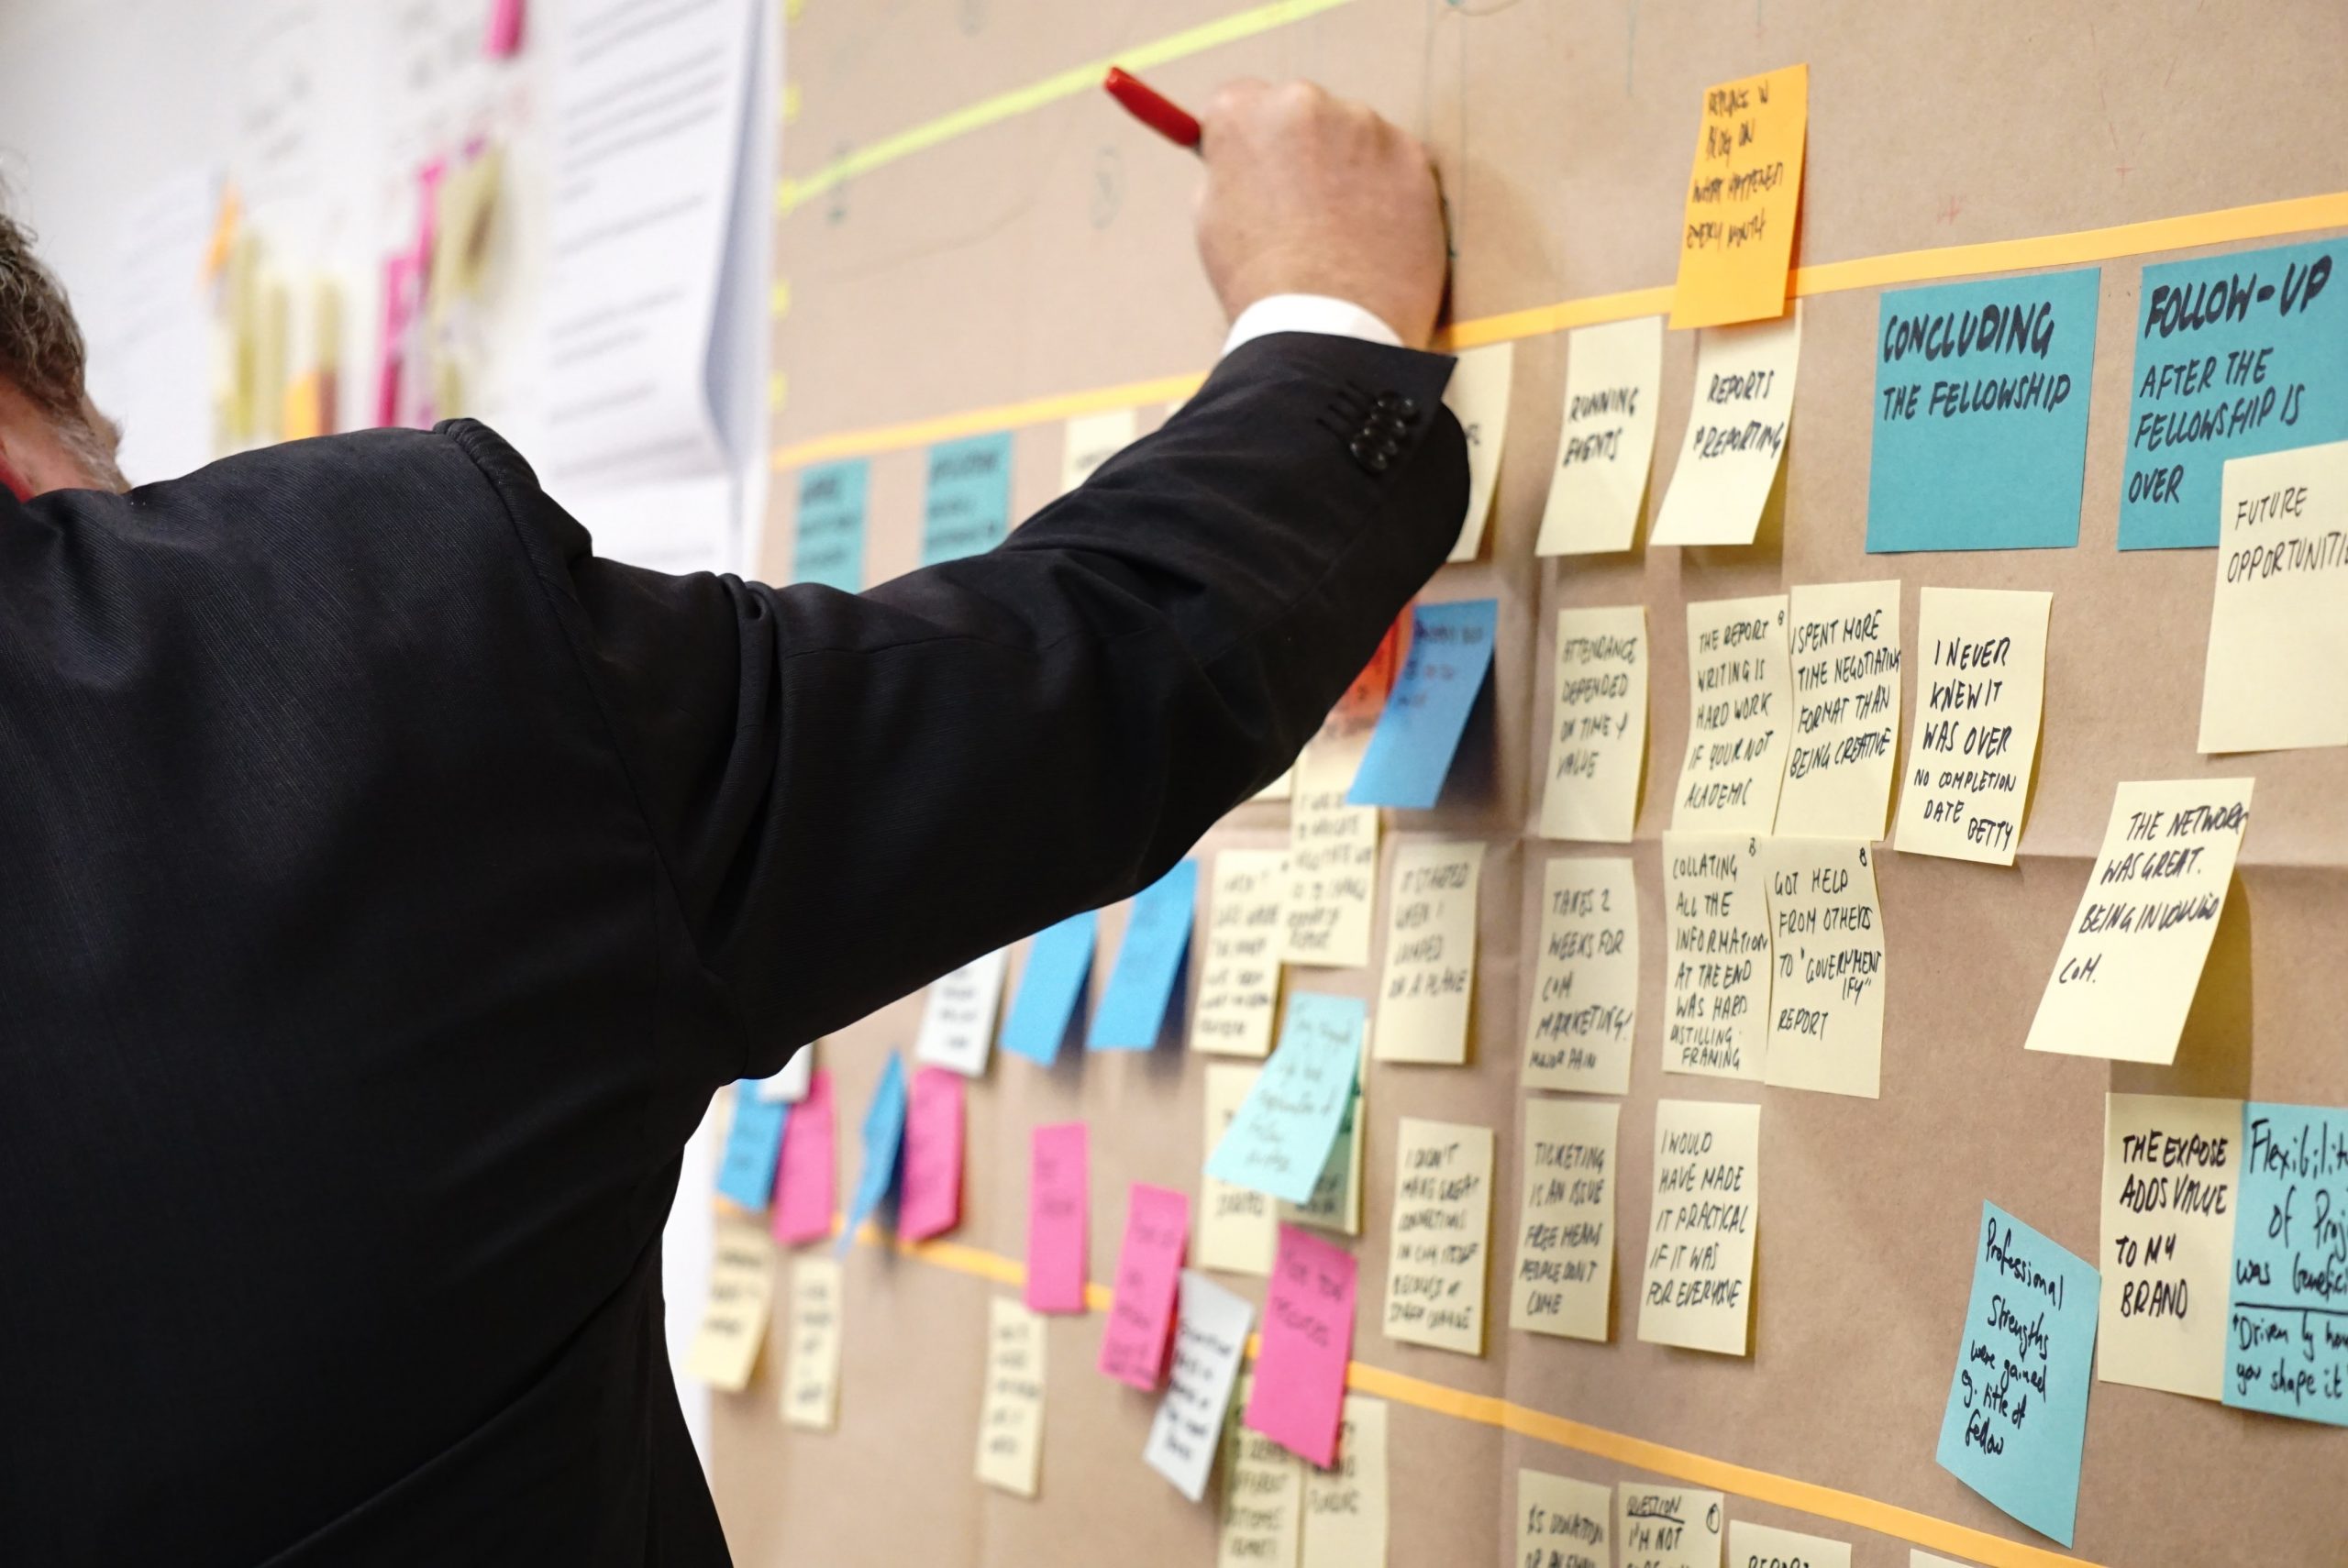 Man making notes on a scrum board